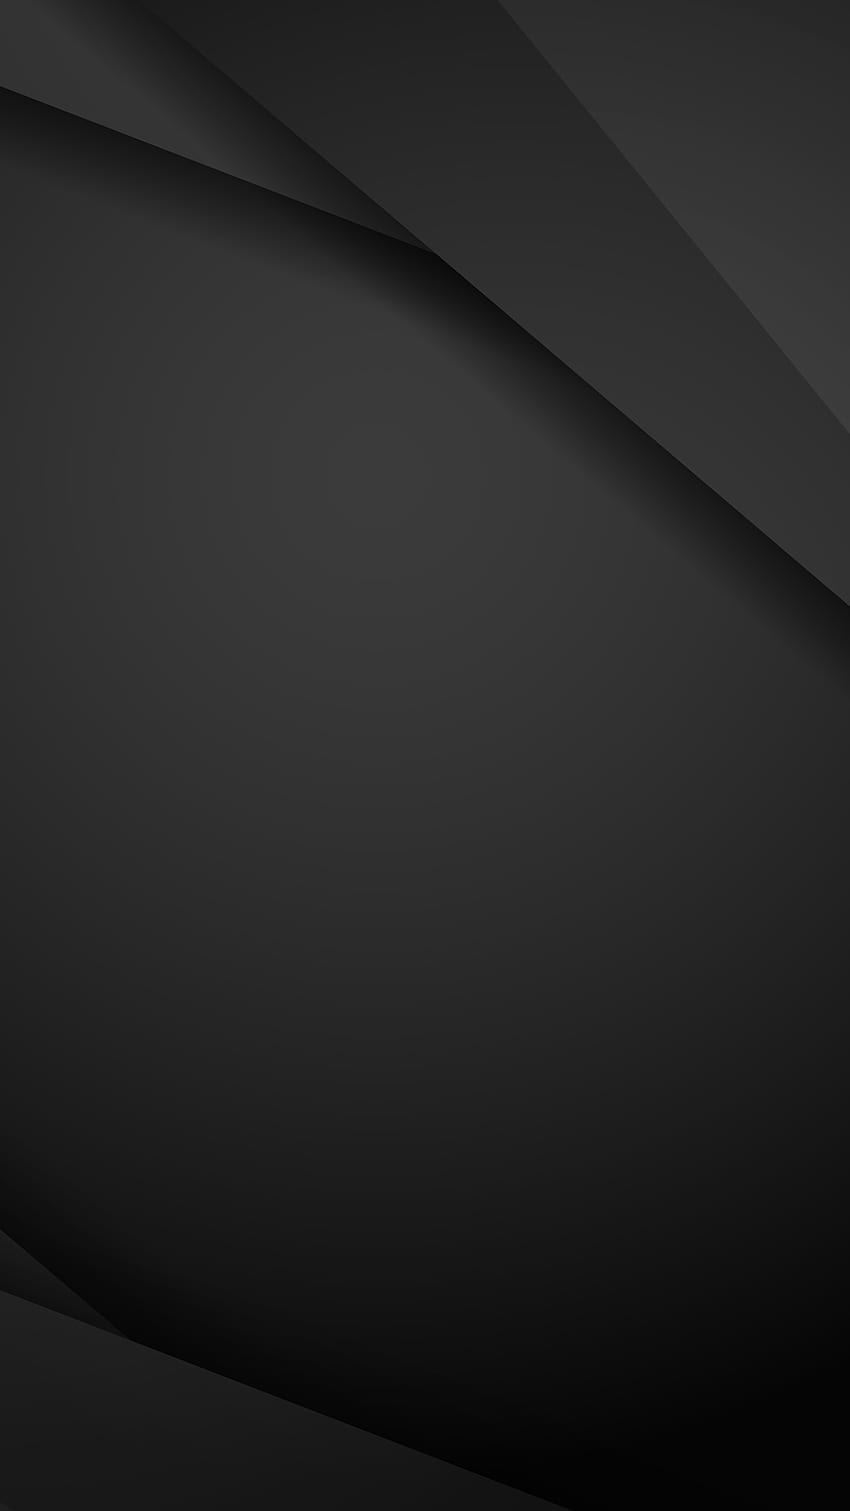 Ultra Dark Abstract For Your Mobile Phone .0075, Dark Smartphone HD phone wallpaper